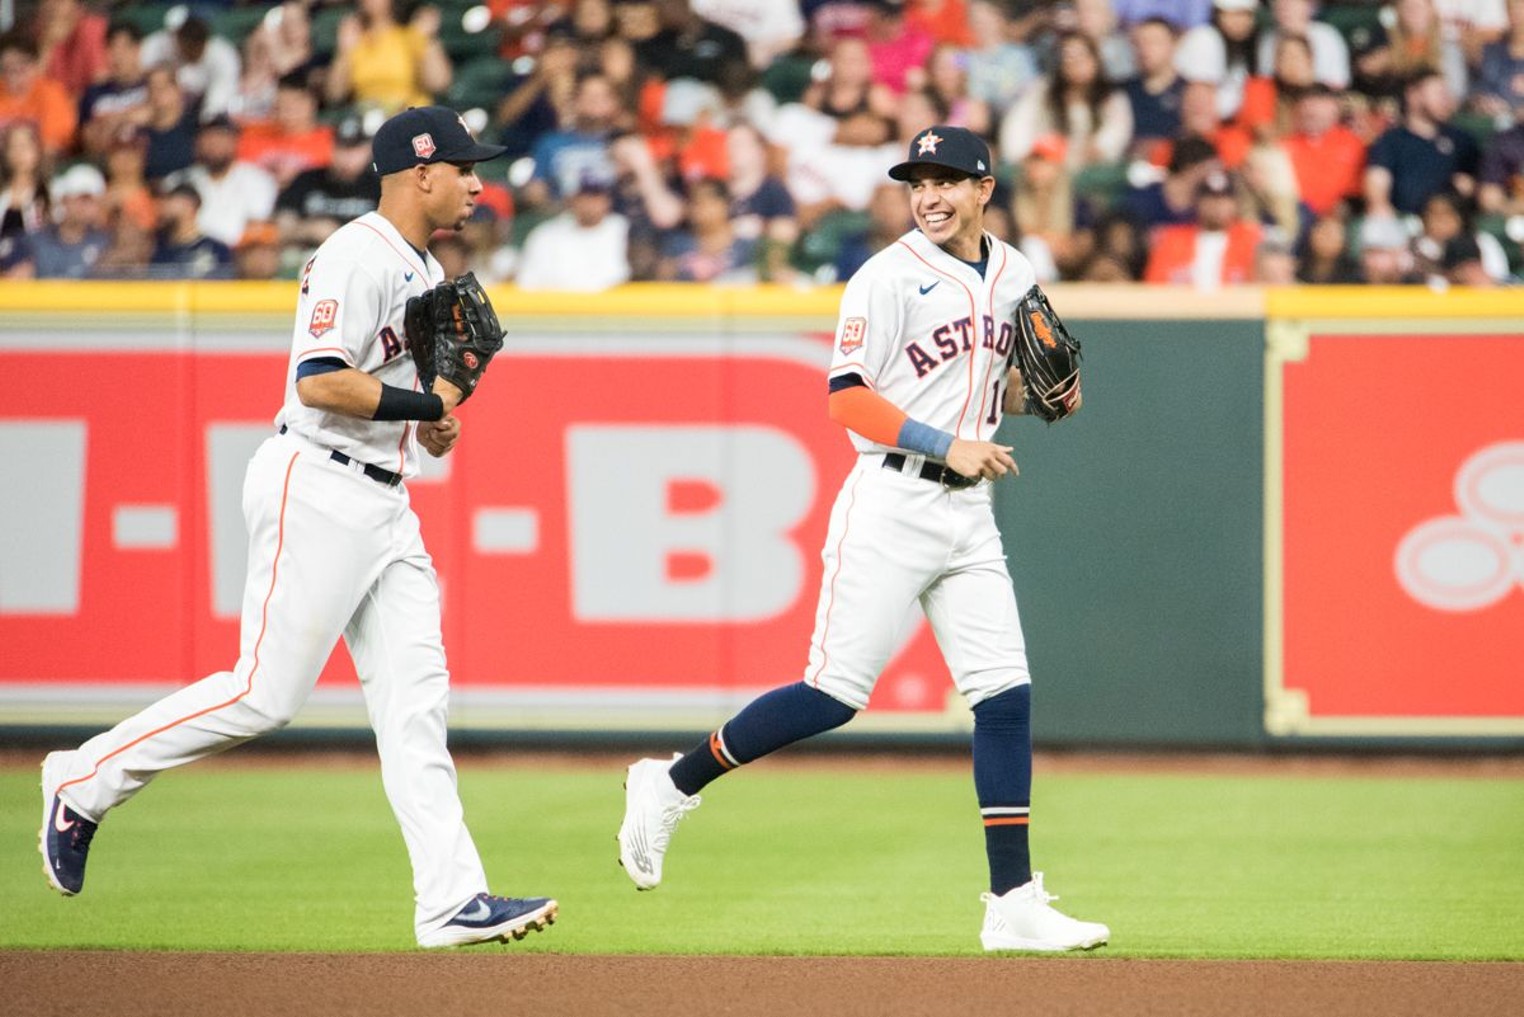 Dubon, McCormick, Pitching and New Rules in This Astros Week